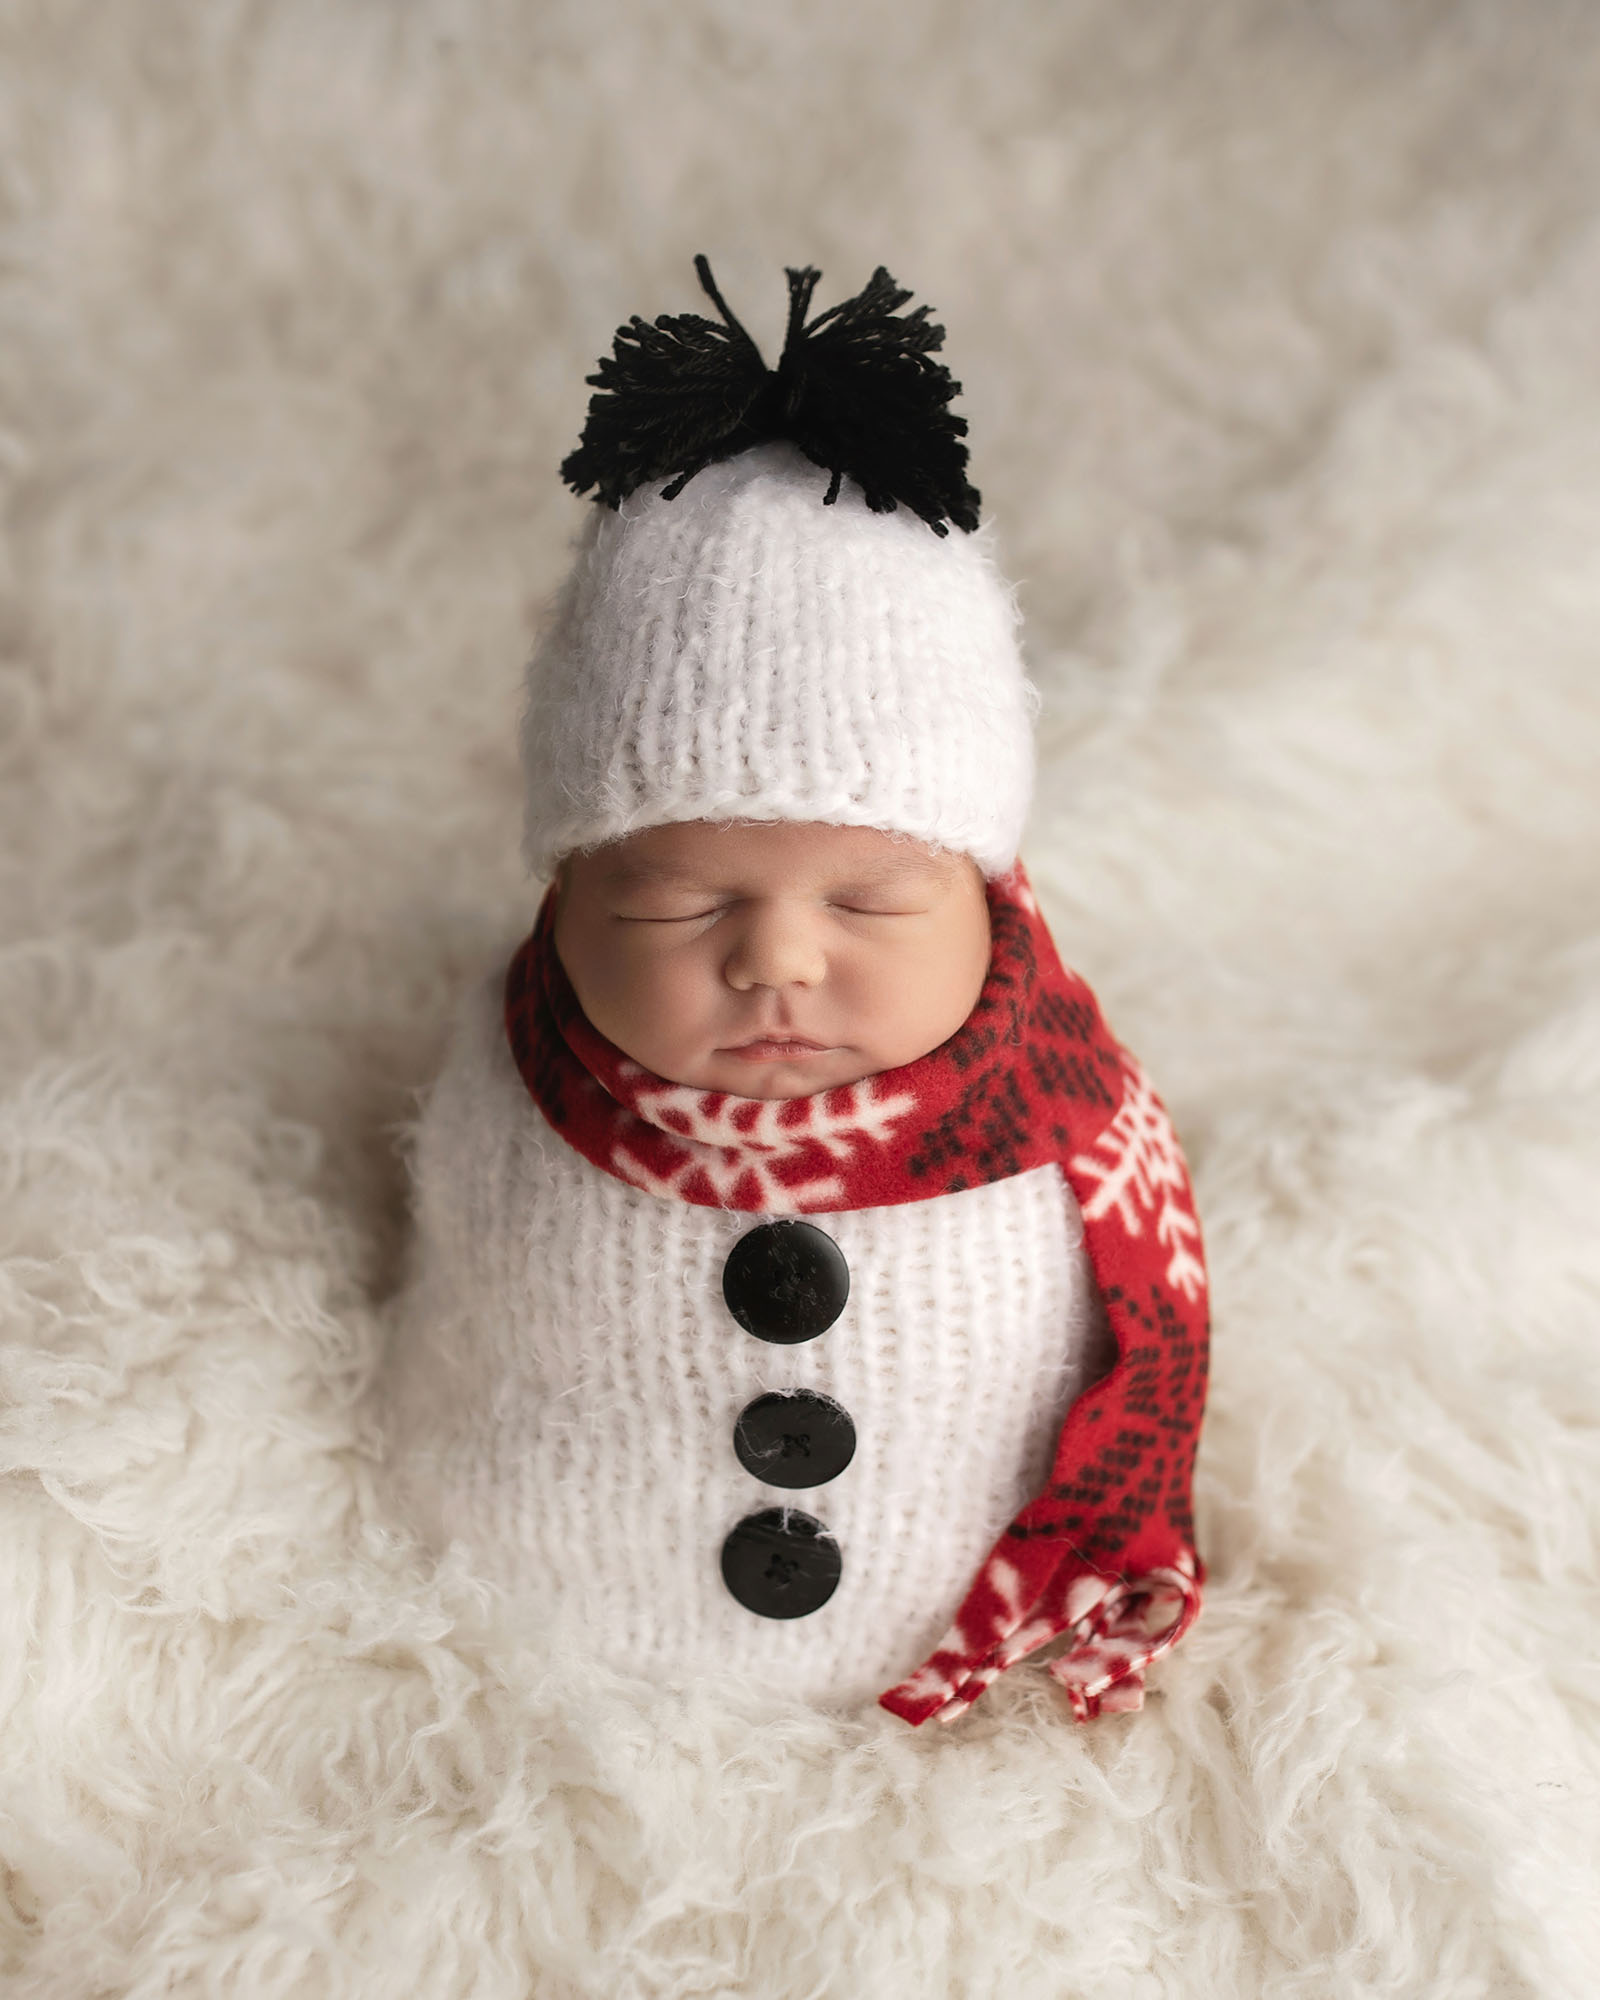 Baby in a snowman suit